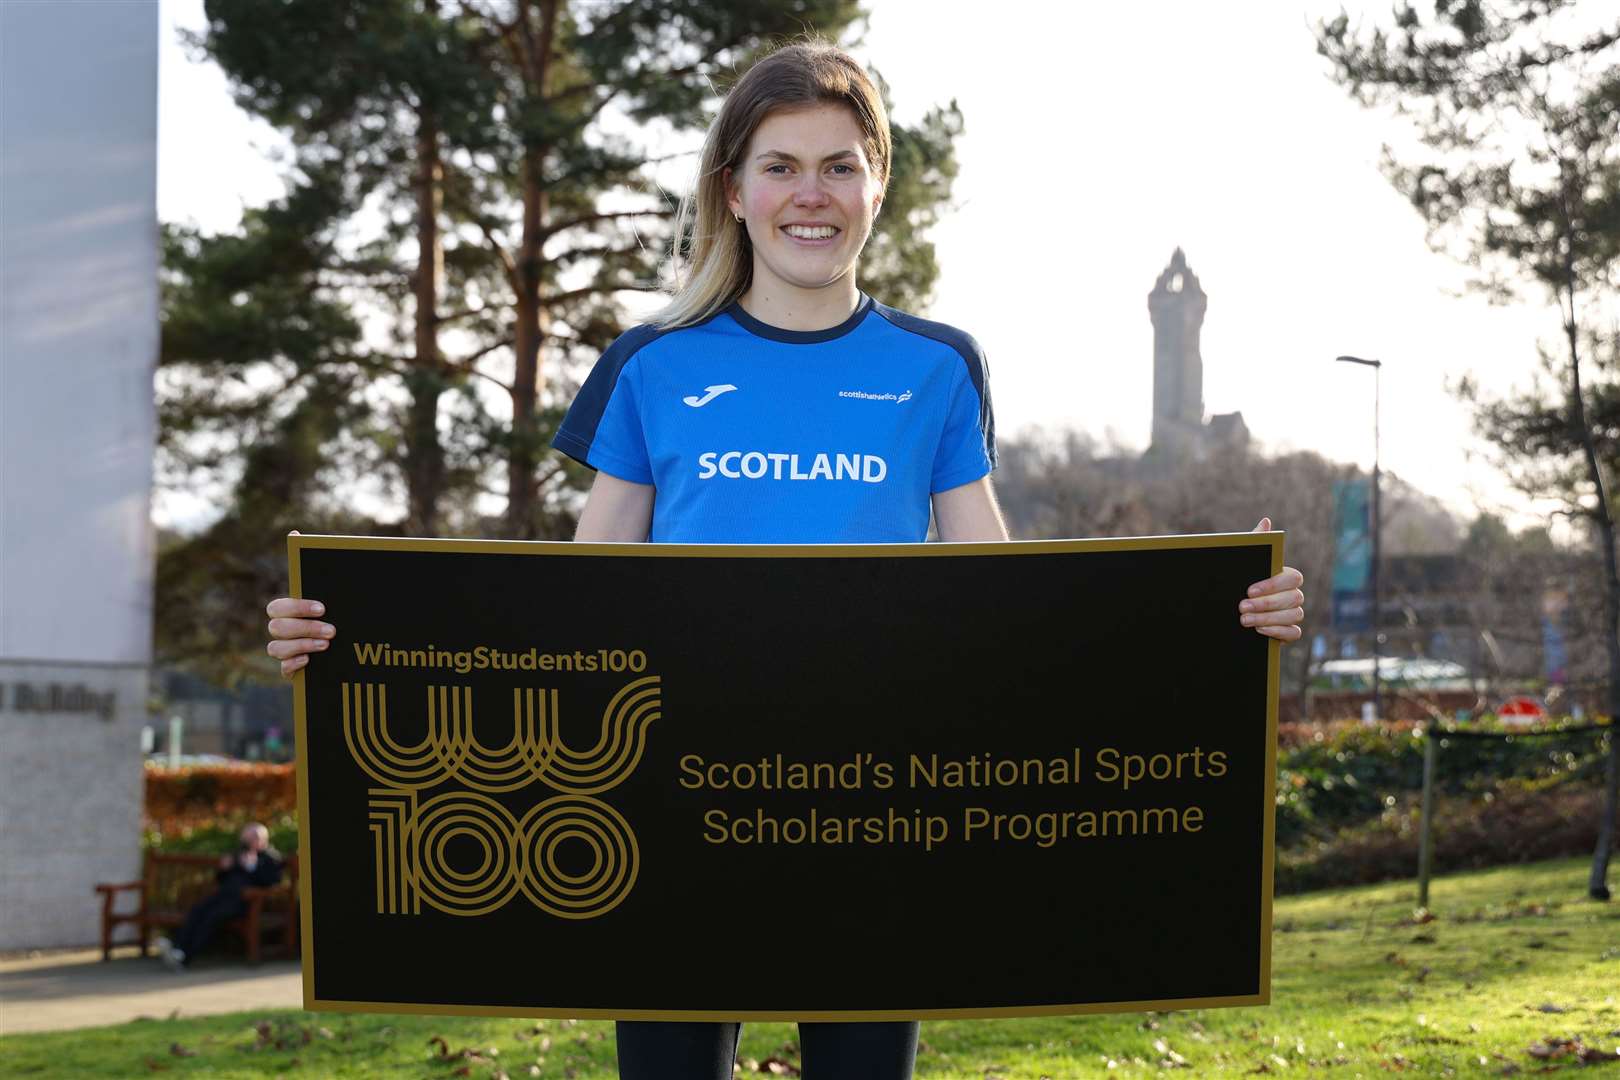 Inverness distance runner Megan Keith is one of 100 university students to receive funding from sportscotland.